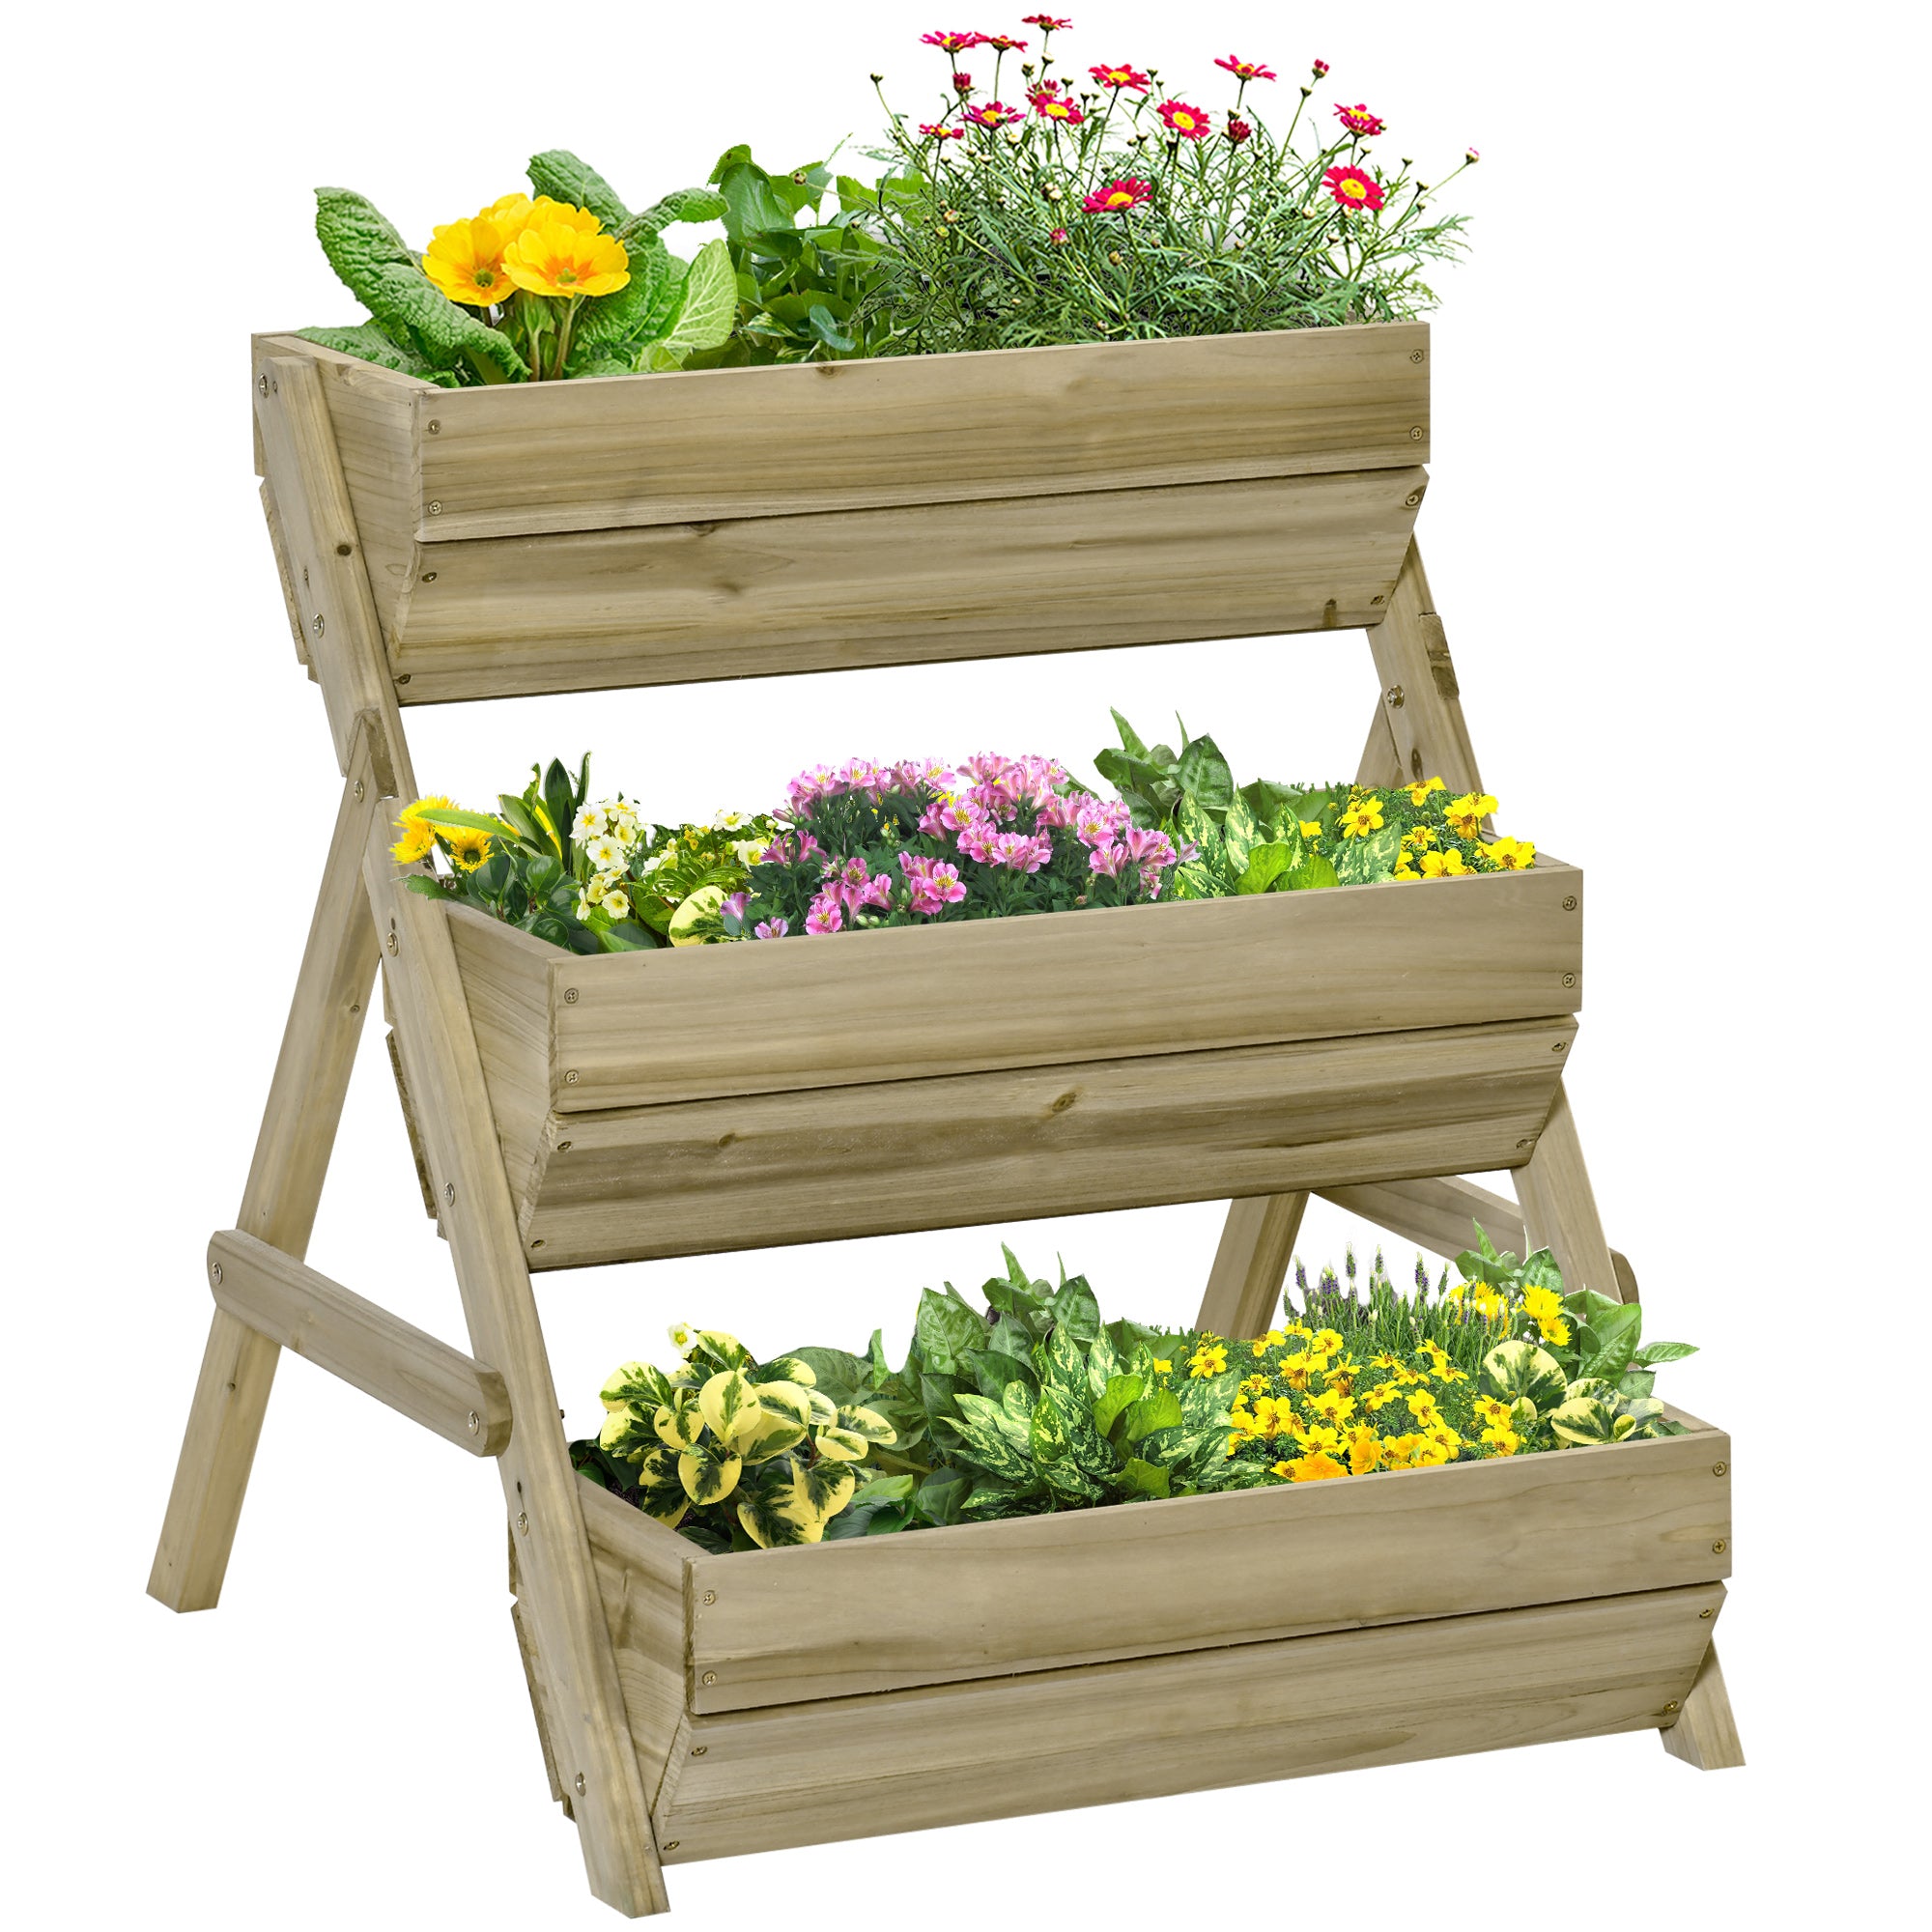 Outsunny 3 Tier Raised Garden Bed Wooden Elevated Planter Box Kit - Green  | TJ Hughes